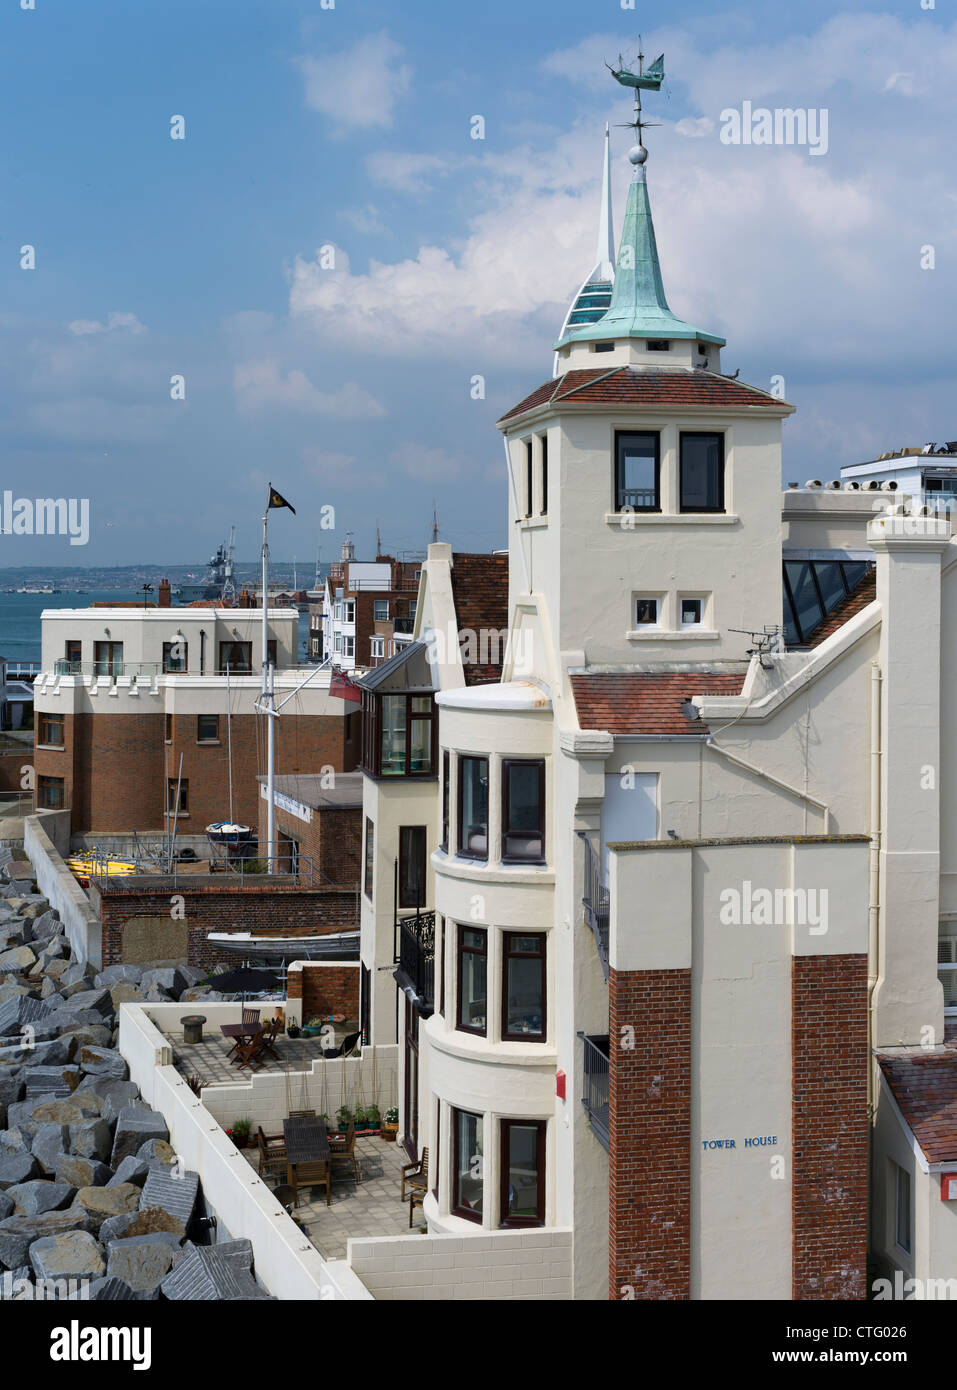 dh Old Portsmouth PORTSMOUTH HAMPSHIRE Naval house architecture building harbour area flats apartment uk luxury modern homes housing england Stock Photo